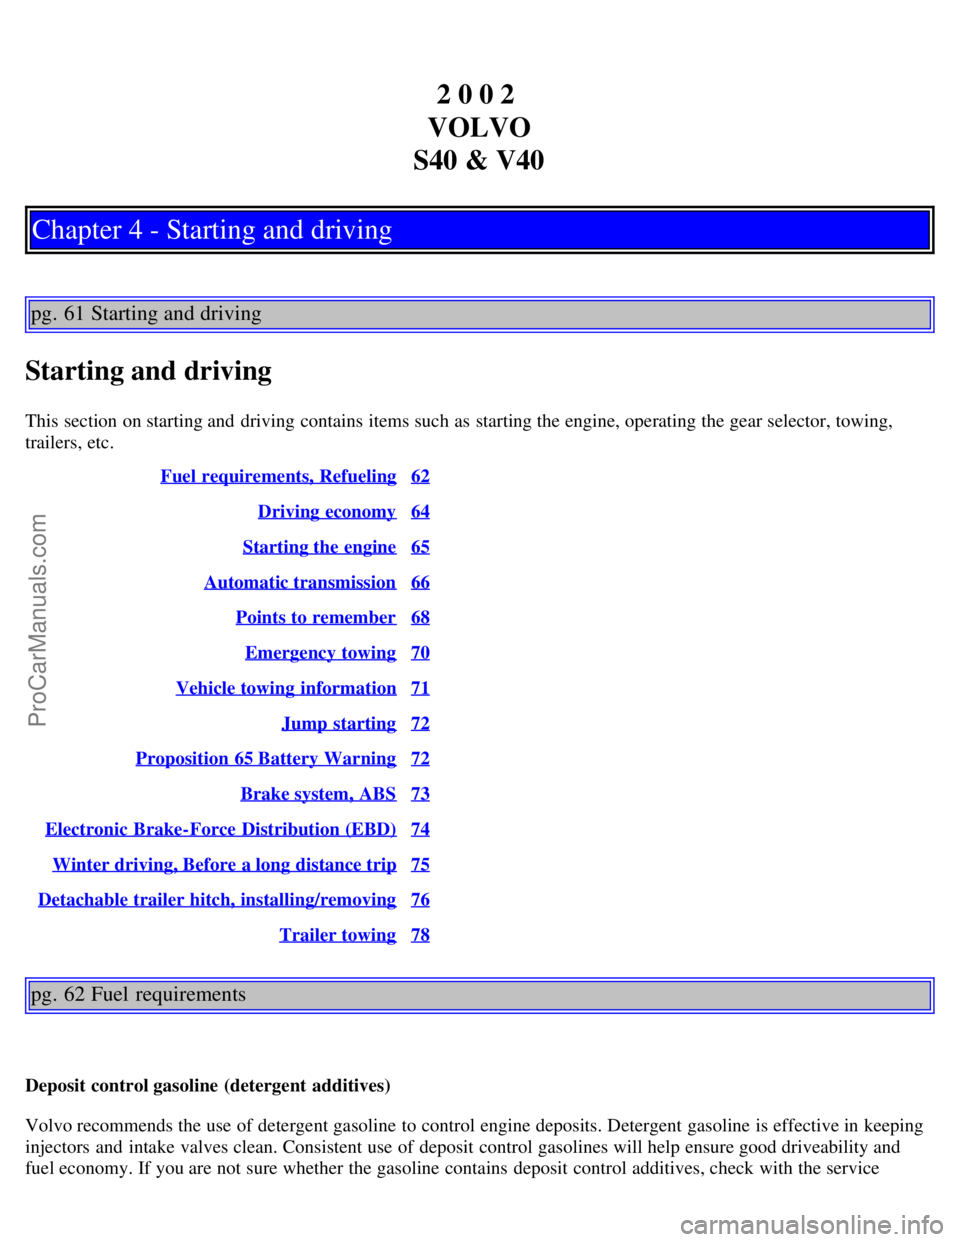 VOLVO S40 2002 Owners Manual 2 0 0 2 
VOLVO
S40 & V40
Chapter 4 - Starting and driving
pg. 61 Starting and driving
Starting and driving
This section on starting and  driving contains items such as starting the engine, operating t